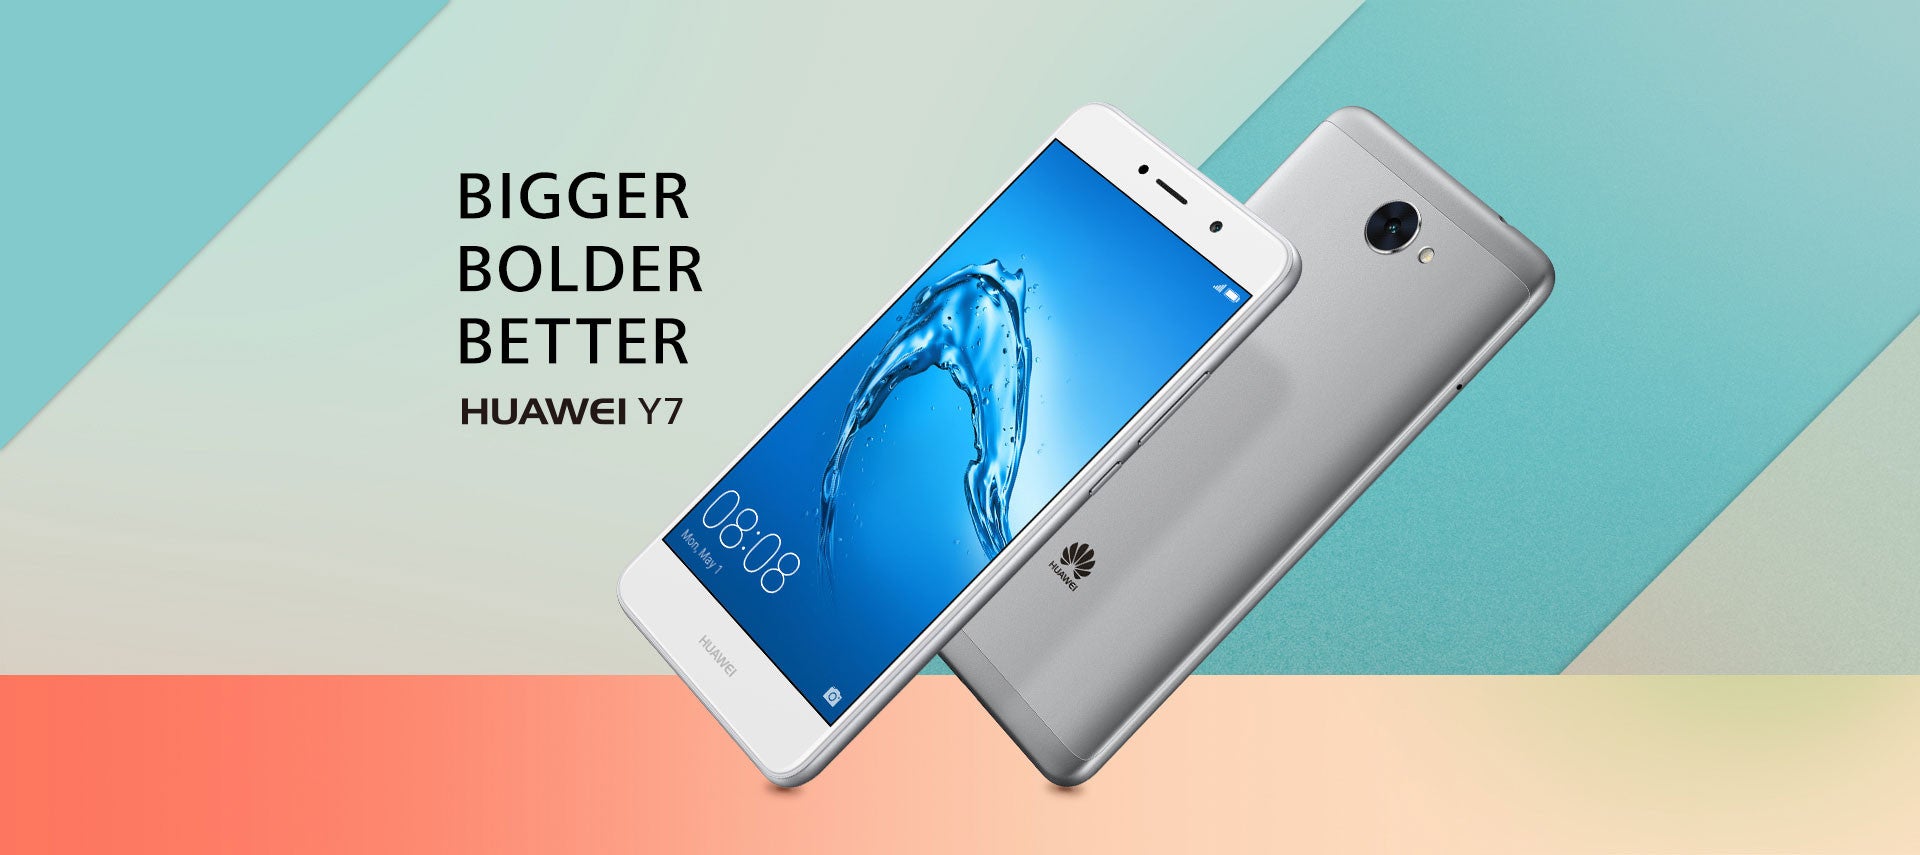 Huawei Y7 goes official with massive 4,000 mAh battery, Android 7.0 Nougat